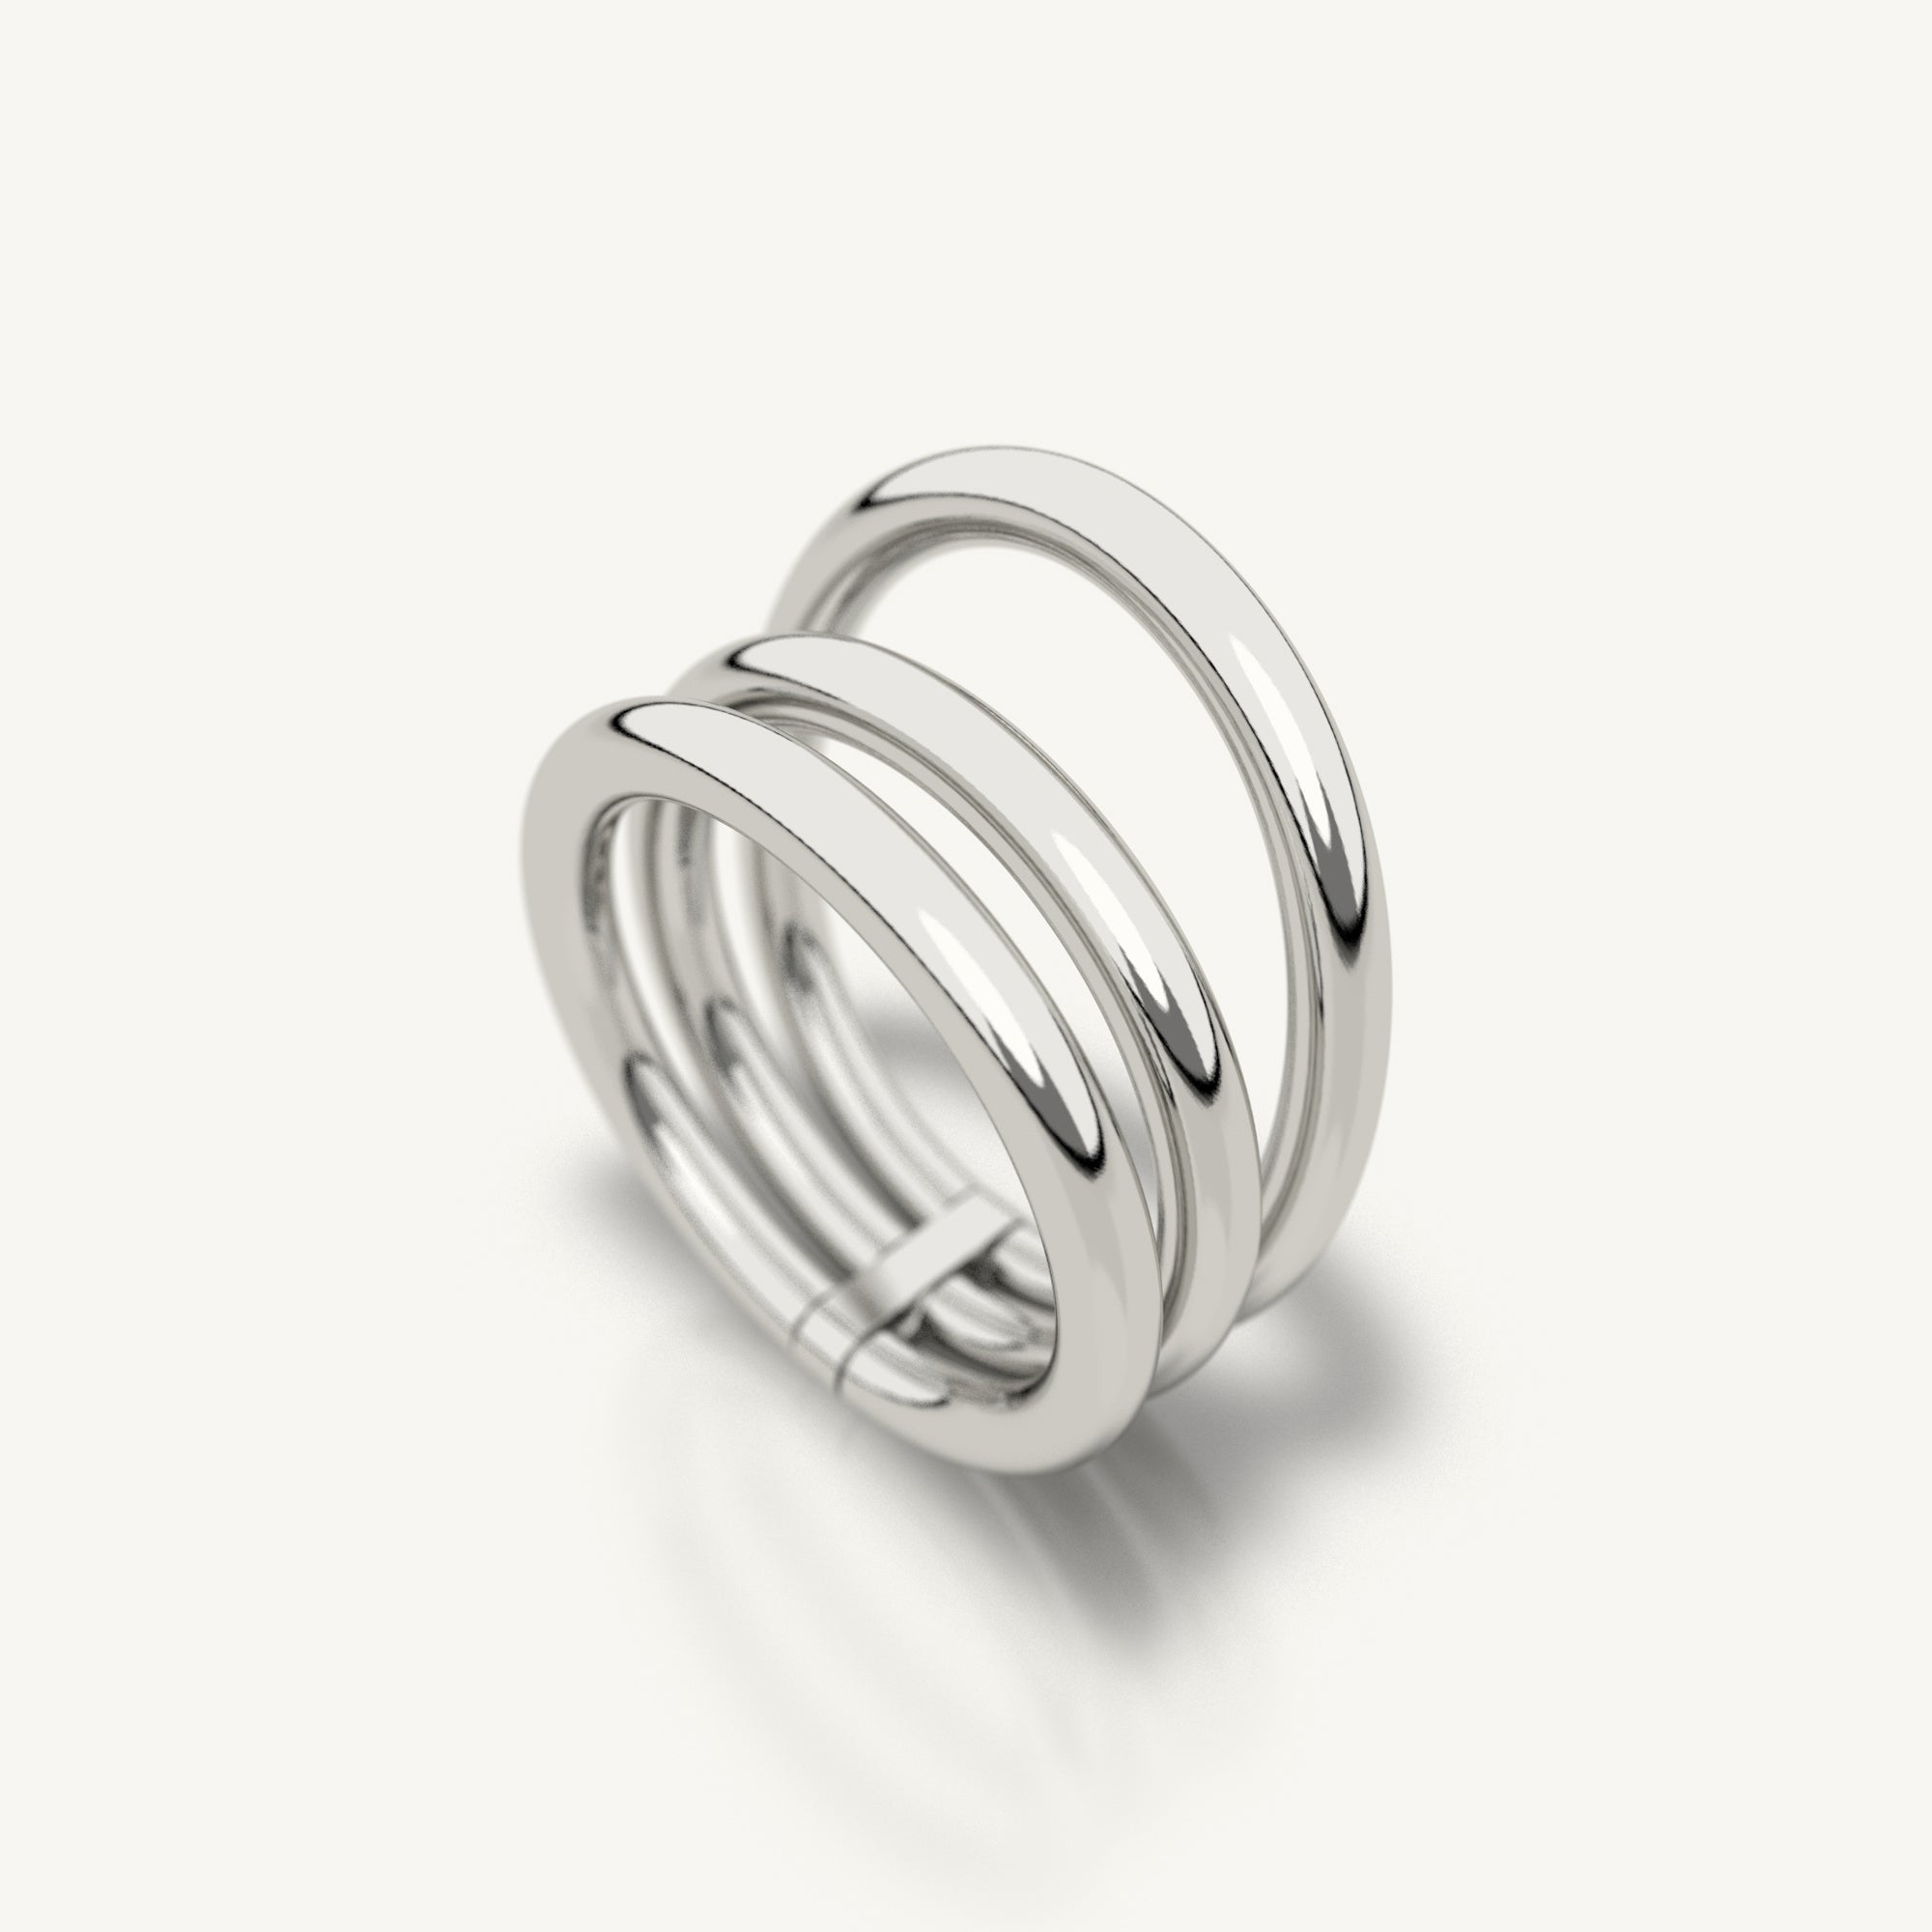 Trio ring from Inacio made from 18k recycled white gold